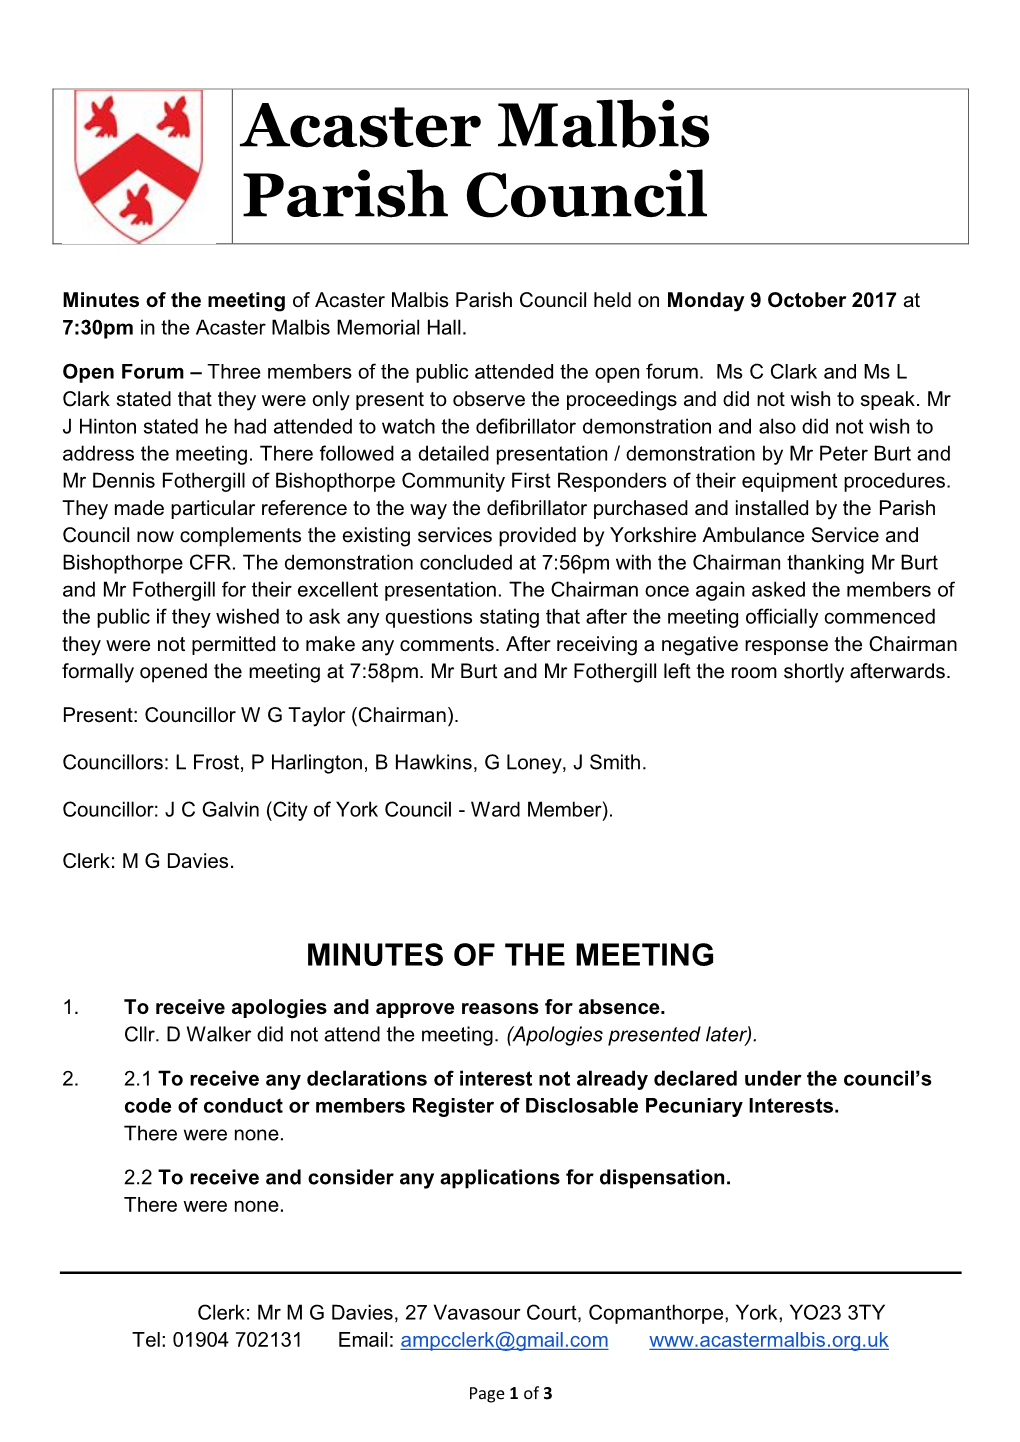 Minutes of the Meeting of Acaster Malbis Parish Council Held on Monday 9 October 2017 at 7:30Pm in the Acaster Malbis Memorial Hall